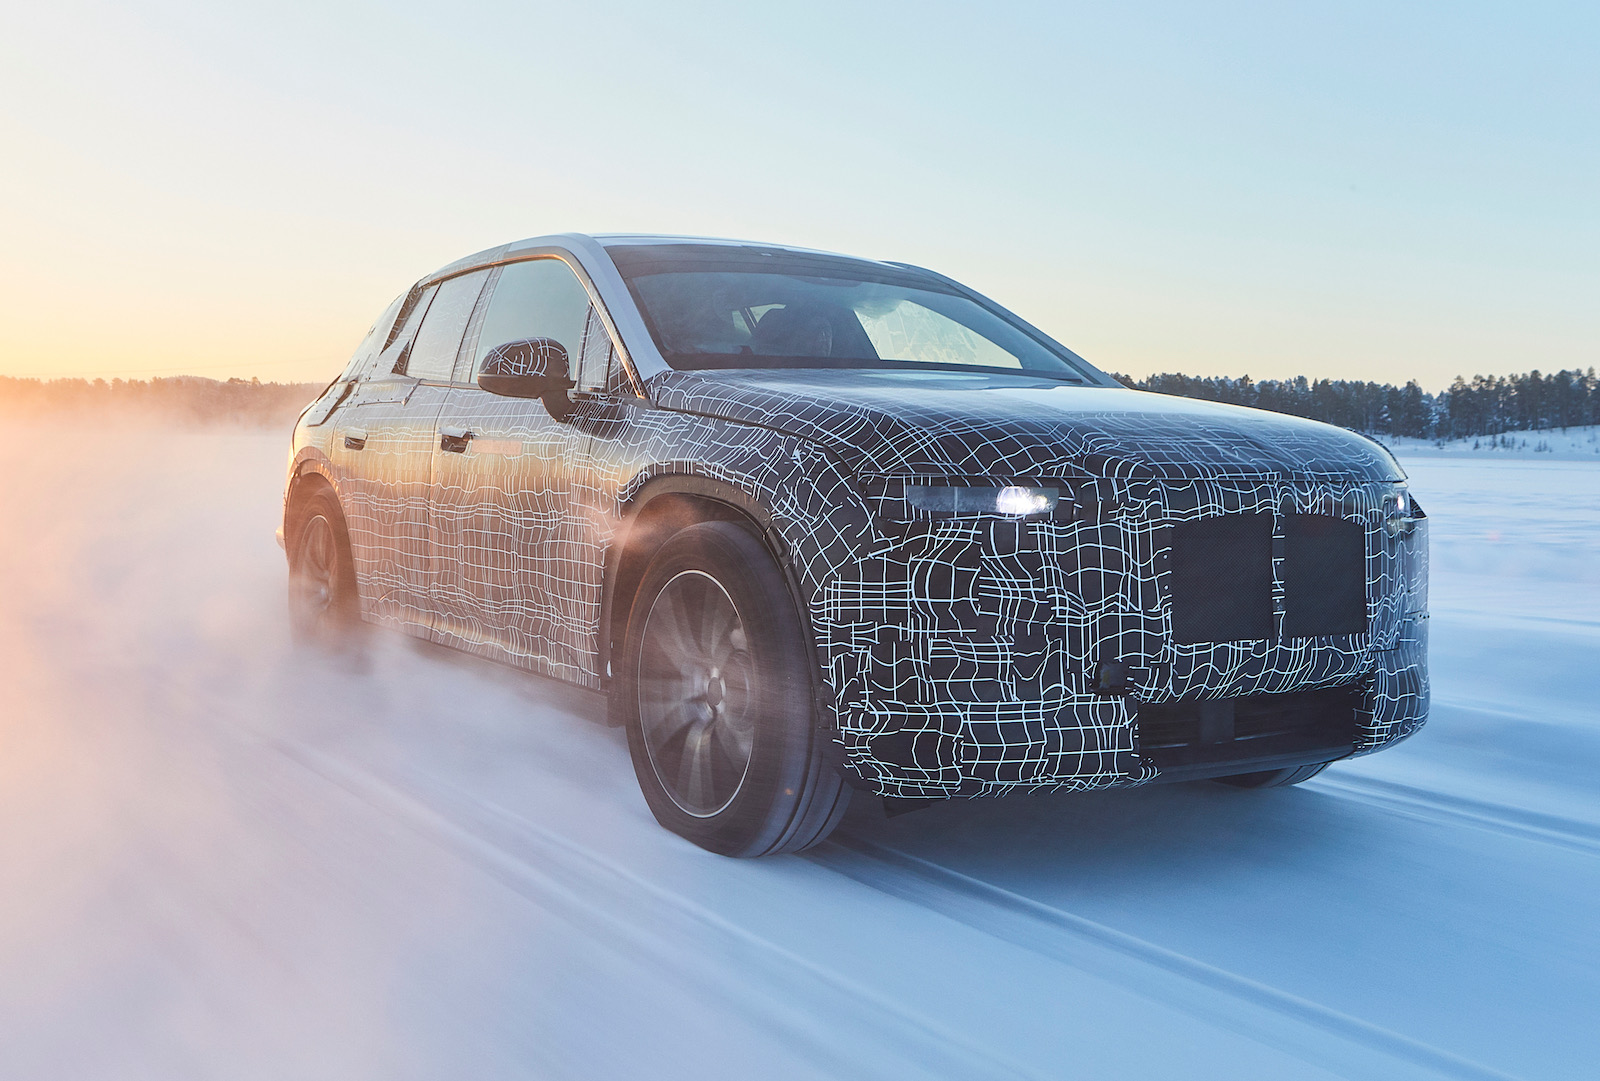 2021 BMW iNEXT electric SUV completes first winter tests